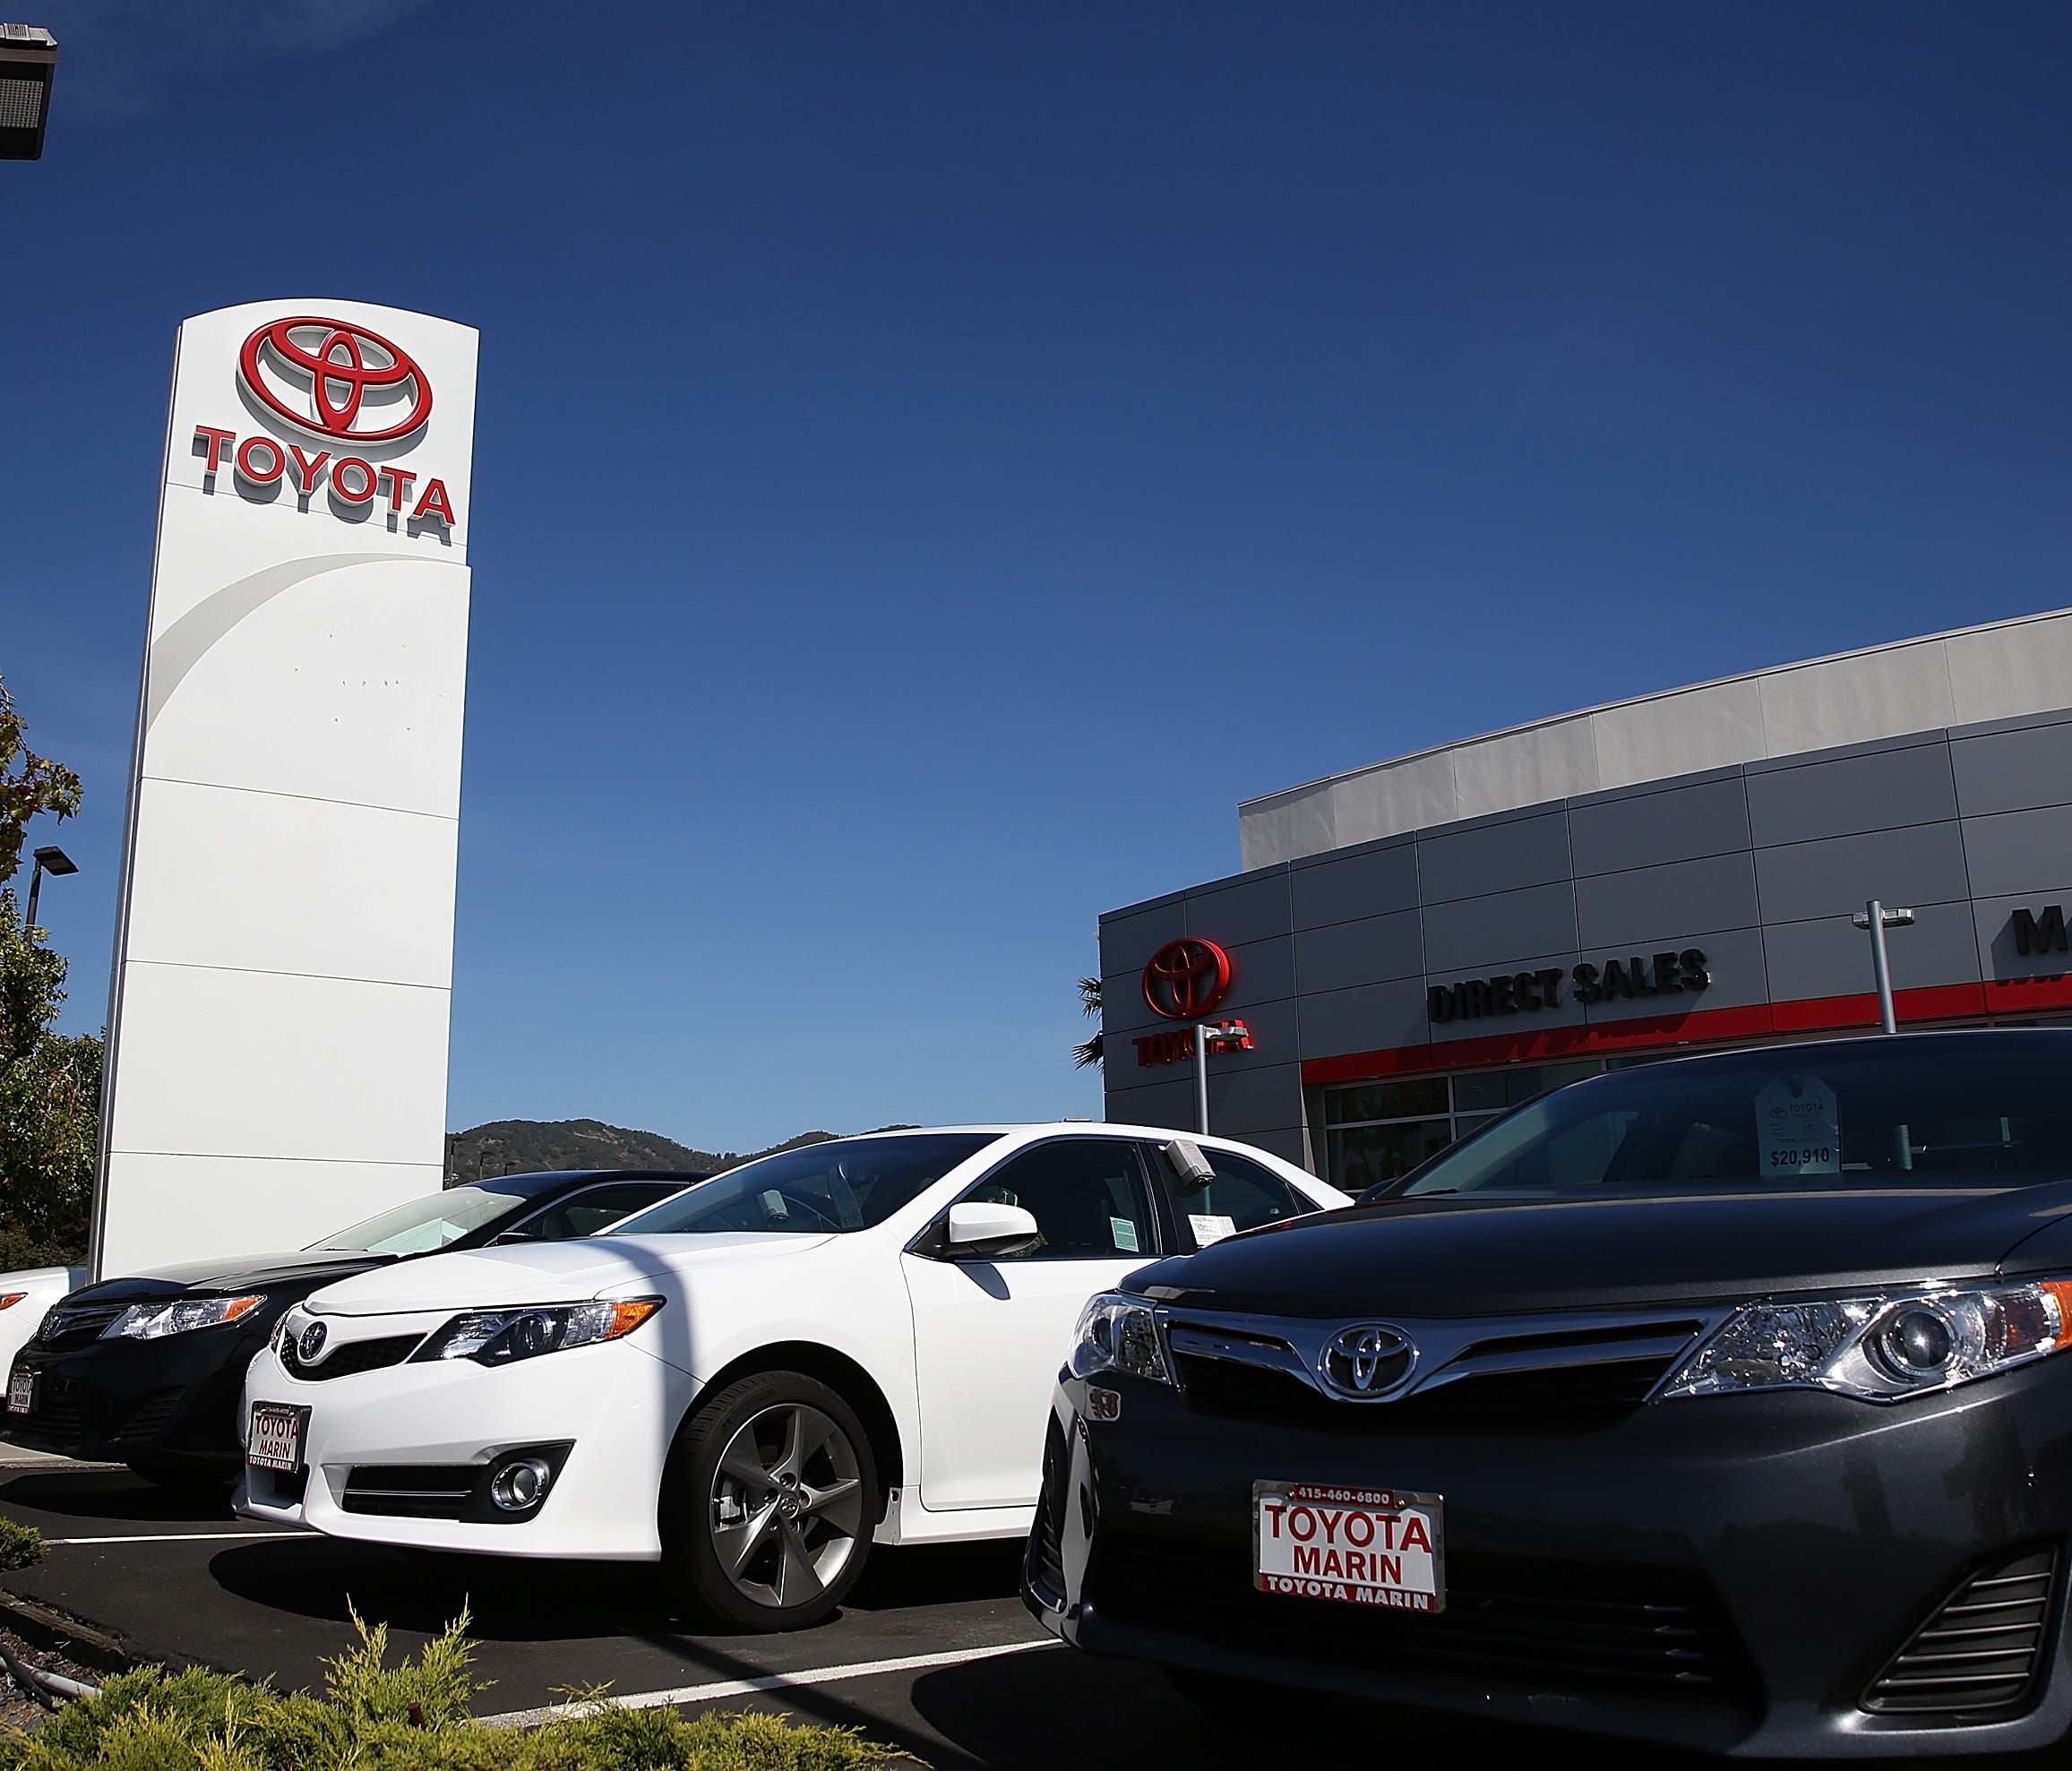 Toyota cars are displayed at Toyota Marin in San Rafael, Calif., in this 2013 file photo